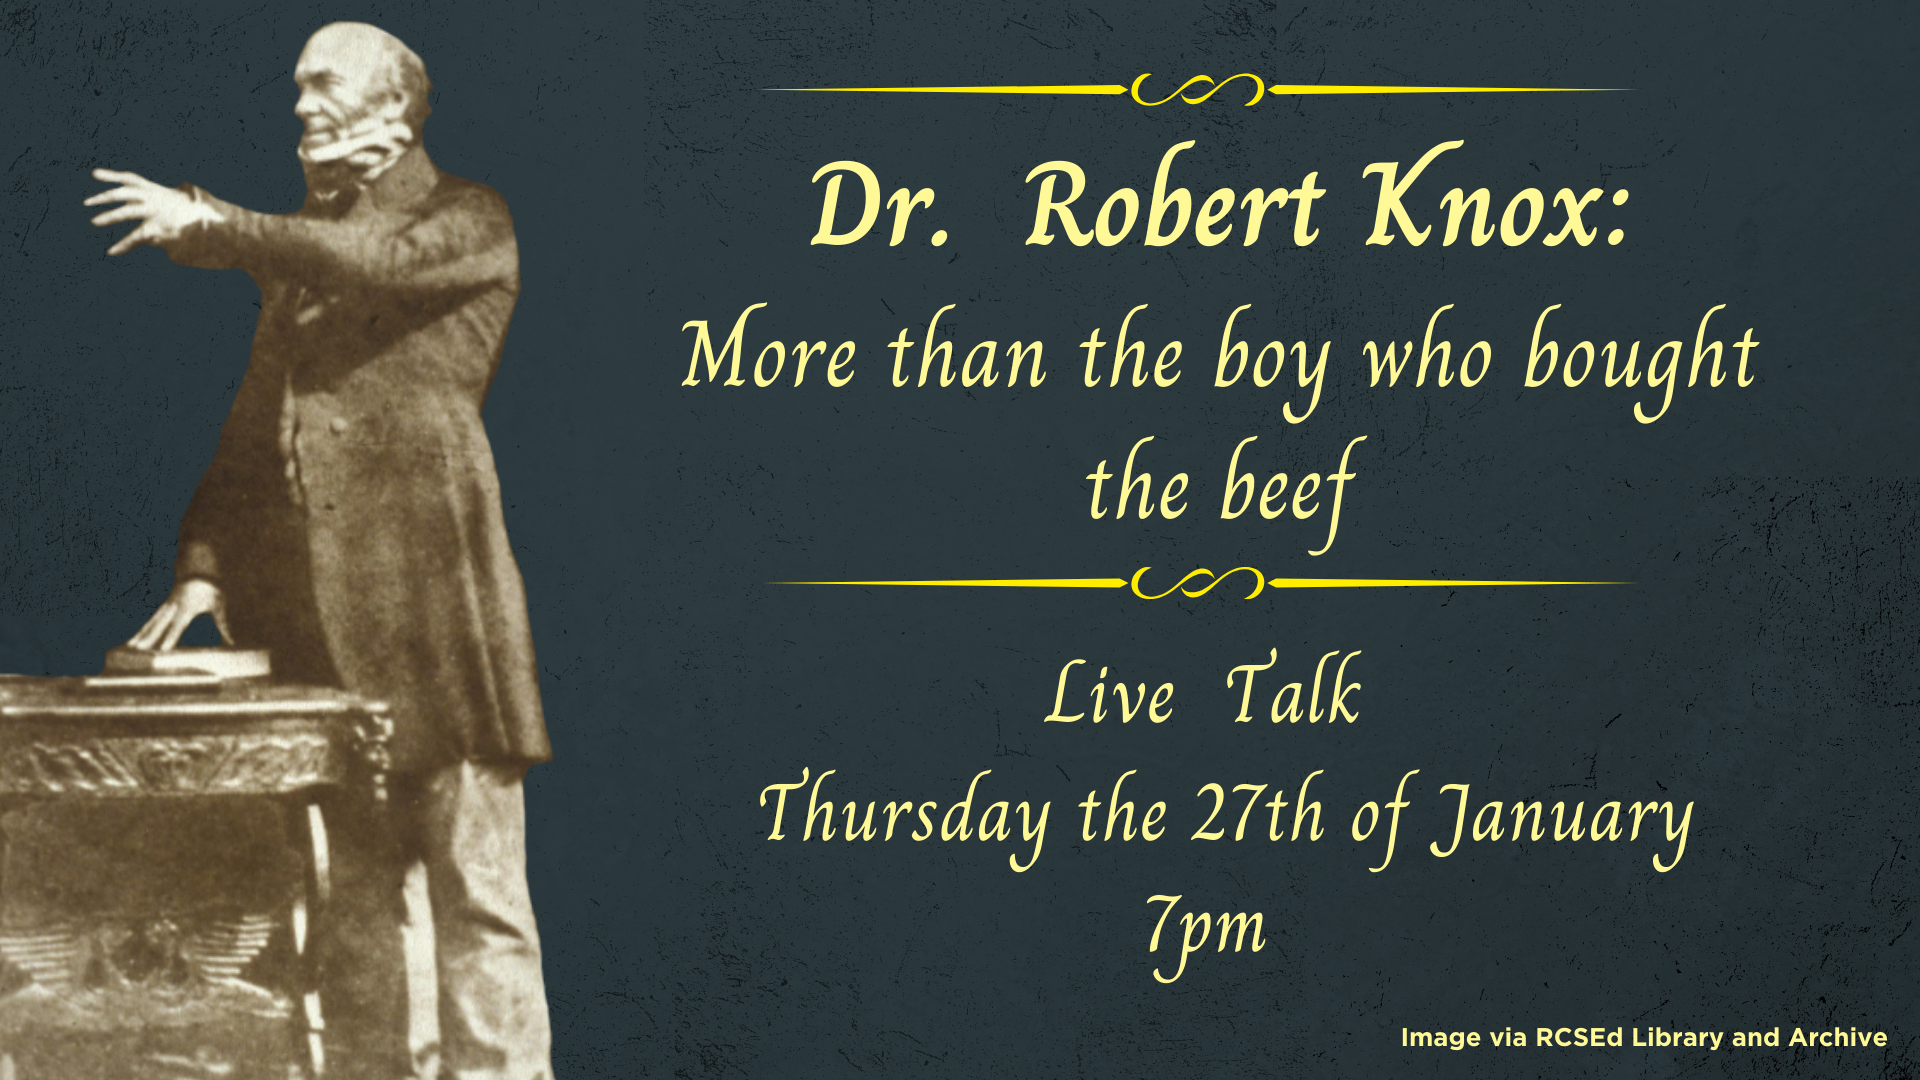 Dr. Robert Knox: more than the boy who bought the beef